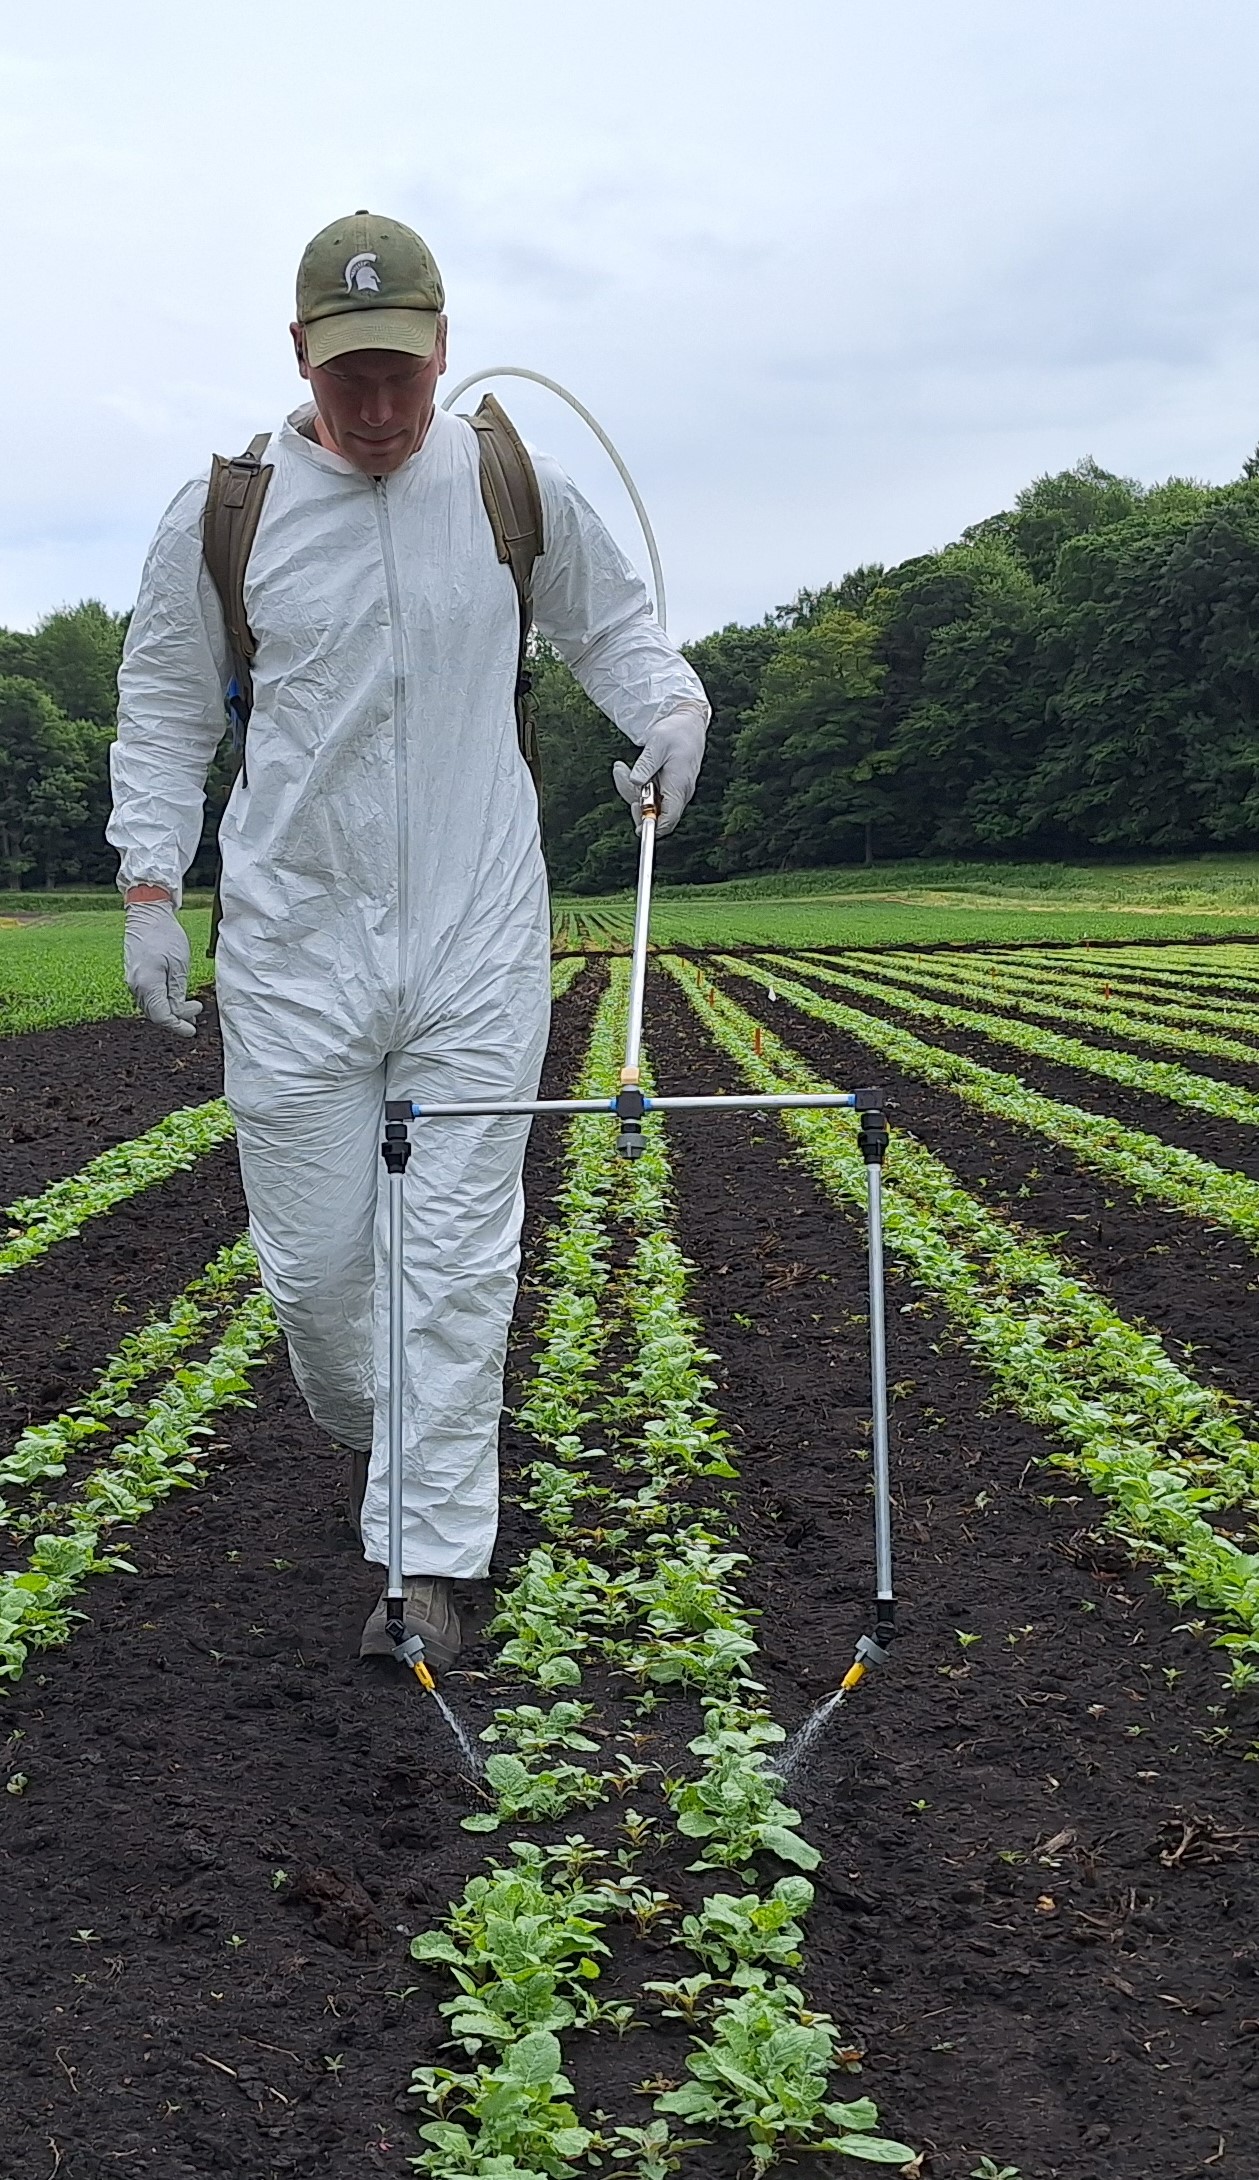 A man with a backpack sprayer boom with drop nozzles spraying the base of plants in a field.